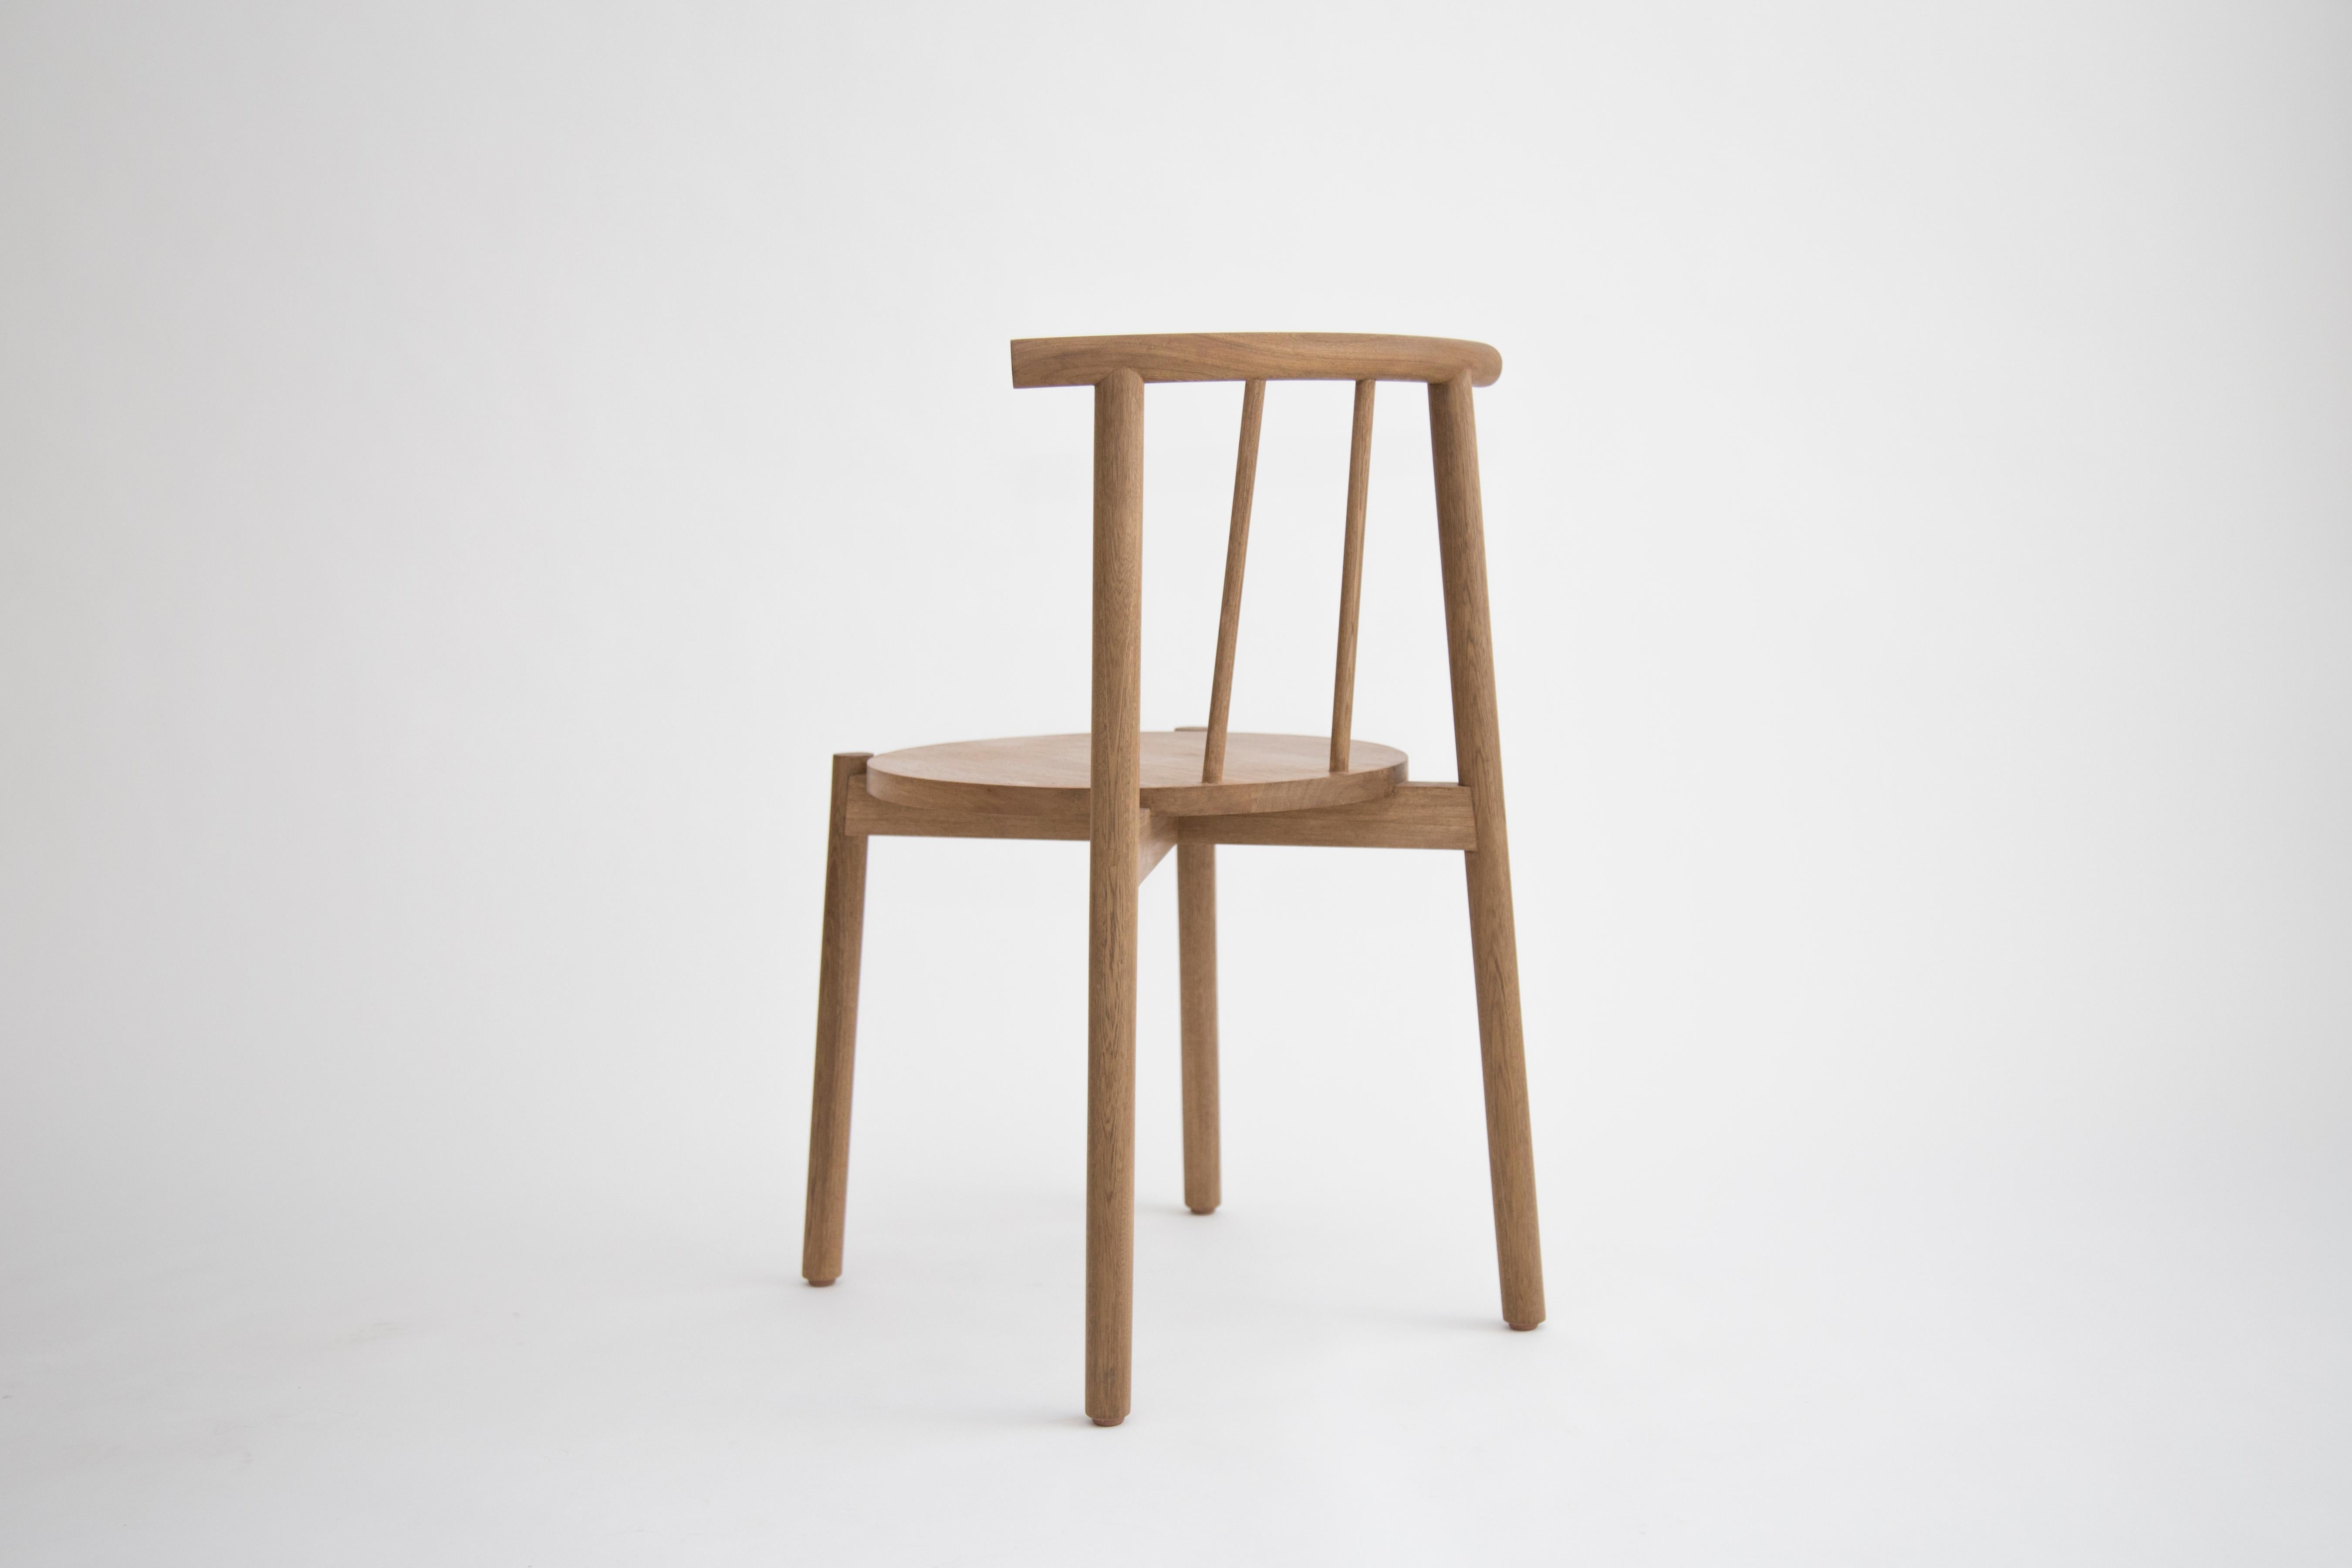 A chair for all occasions, from the ordinary to the extraordinary. This piece of furniture serves as a synthesis of structure and form, both remarked by its constructive clarity and silent beauty. 

Crafted in oak wood by fine cabinetmakers in